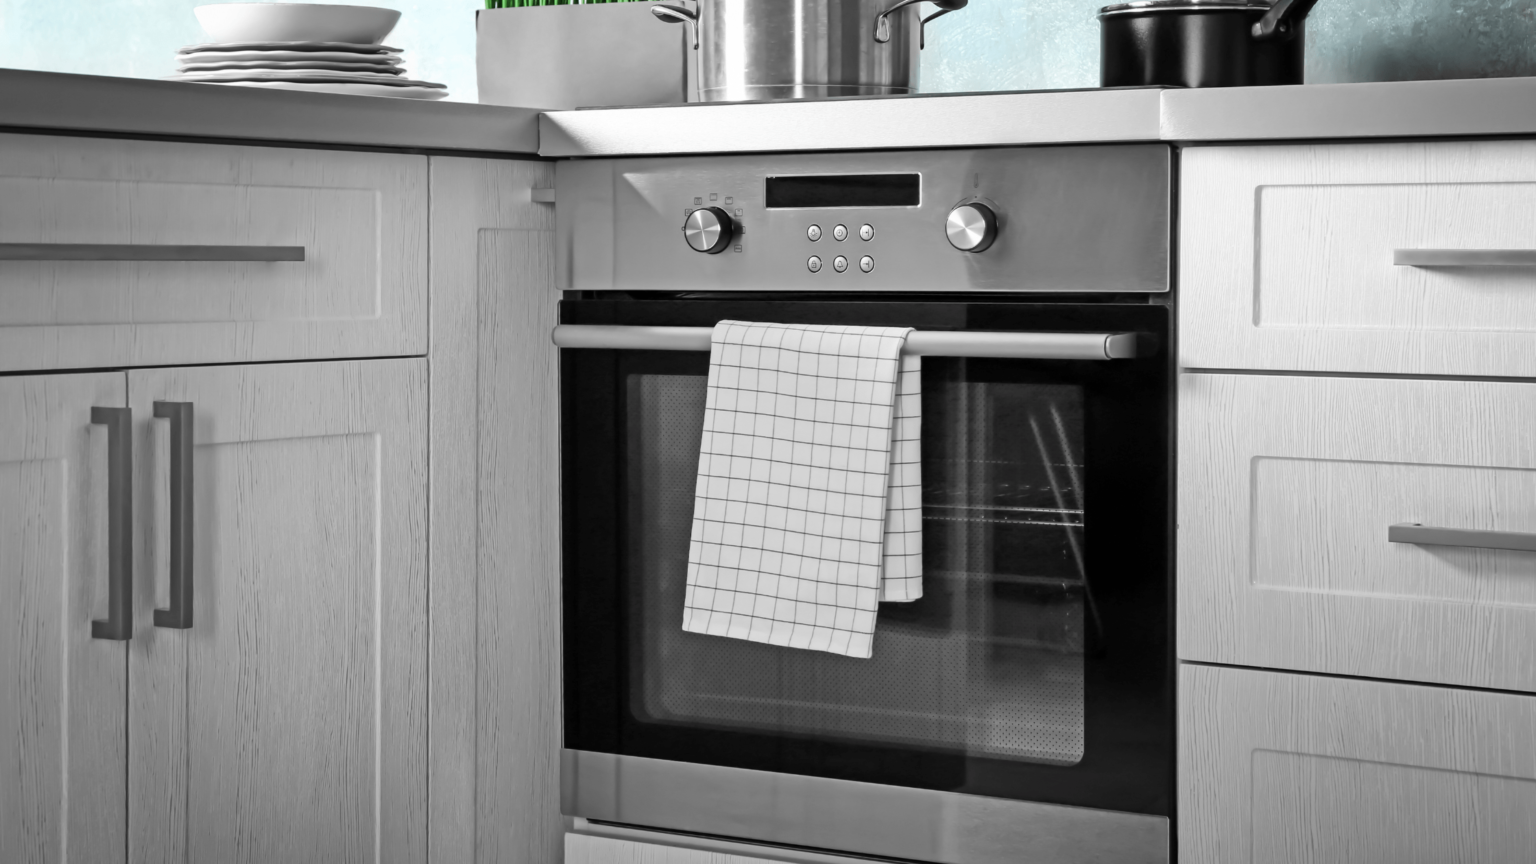 6 Reasons Why Your Electric Oven Is Failing To Self-Clean